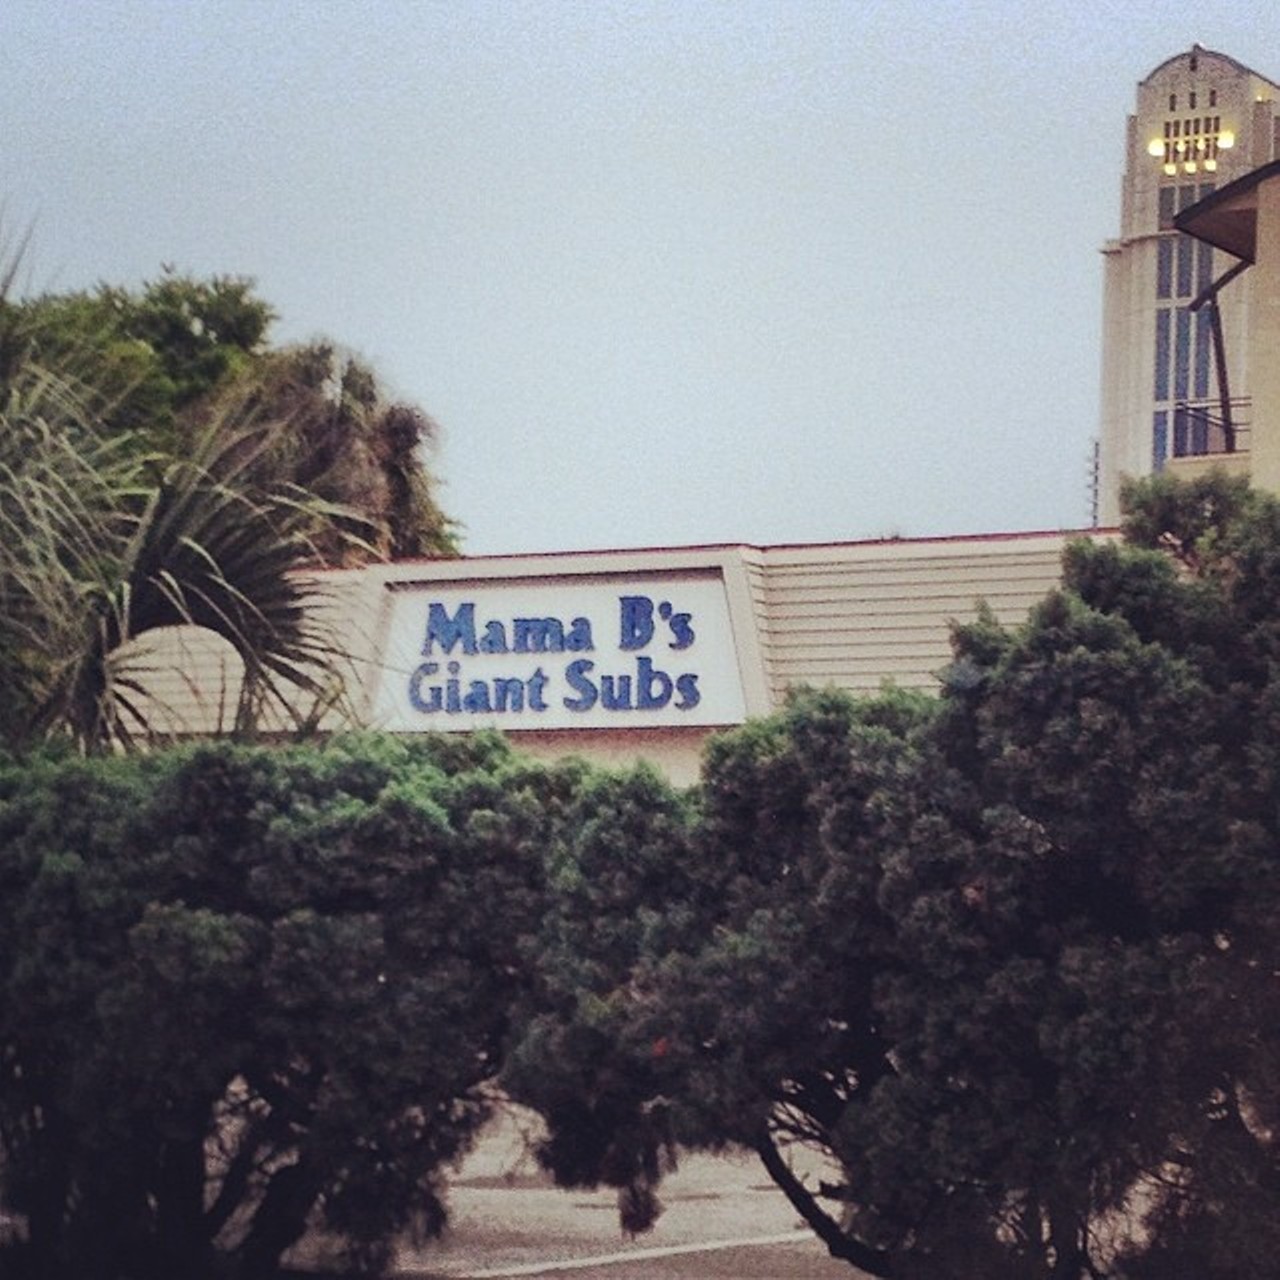 Mama B&#146;s Giant Subs
Just off of Colonial and surrounded by high-rise developments, Mama B's refuses to budge. Their sammies are great and may even have a following that rivals Publix &#150; well, at least in the downtown area. 
692 N. Orange Ave., PHONE NUMBER; $
Photo via baholleyjr/Instagram